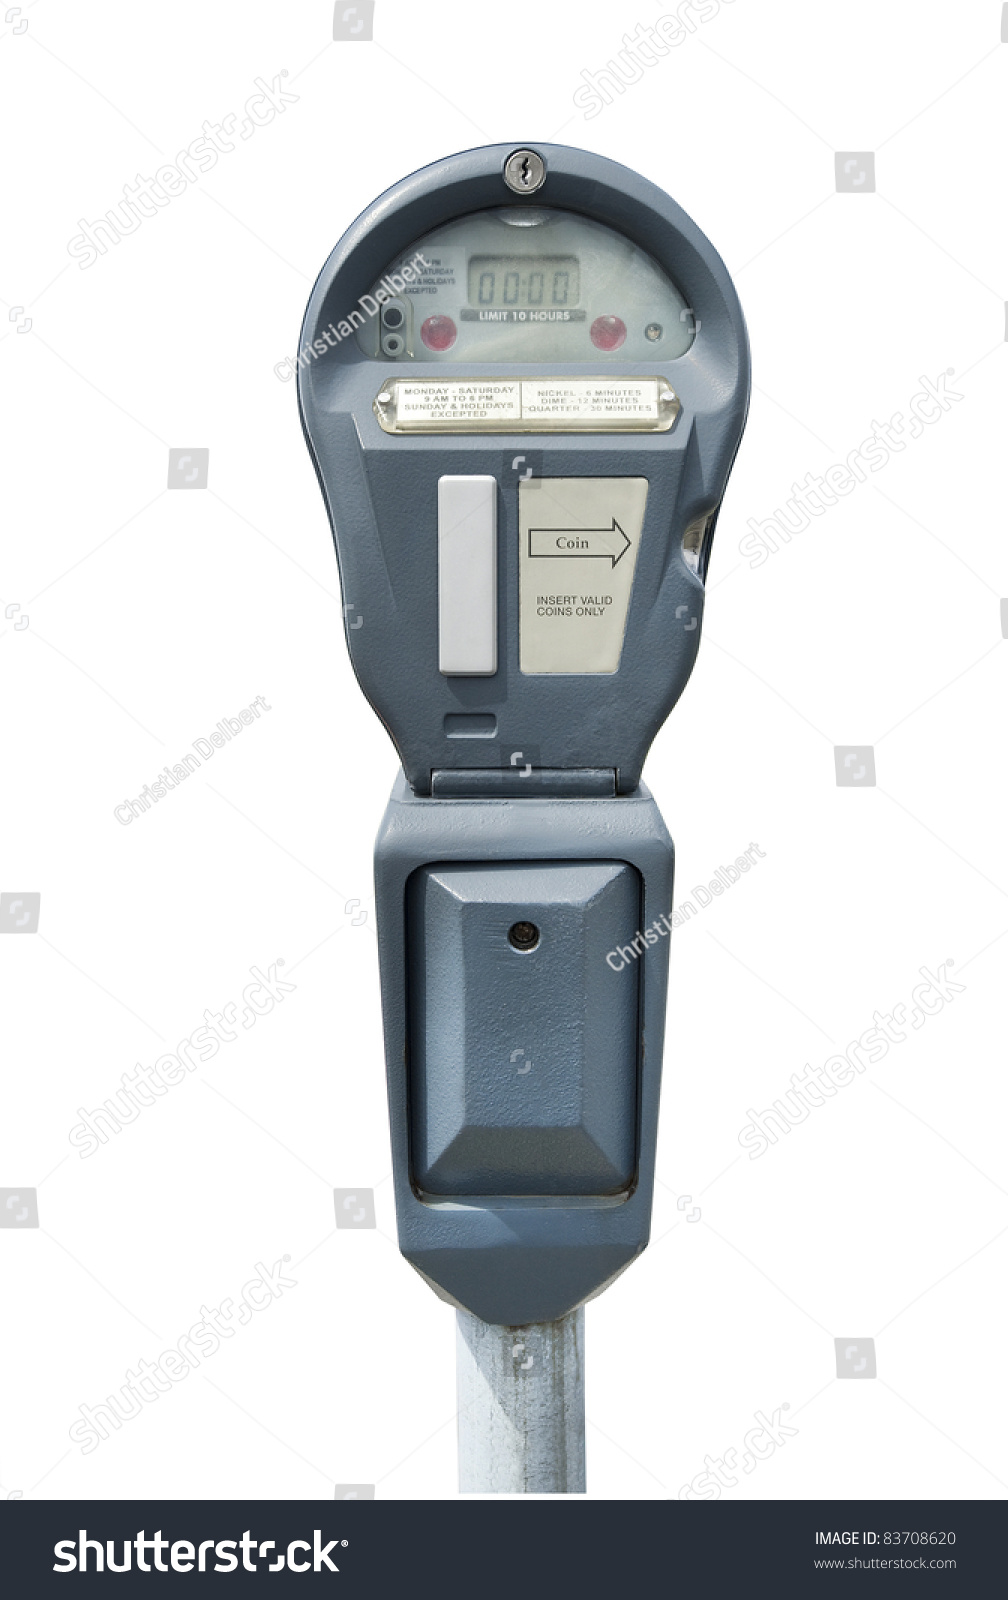 Parking meter on white, isolated with clipping path #83708620